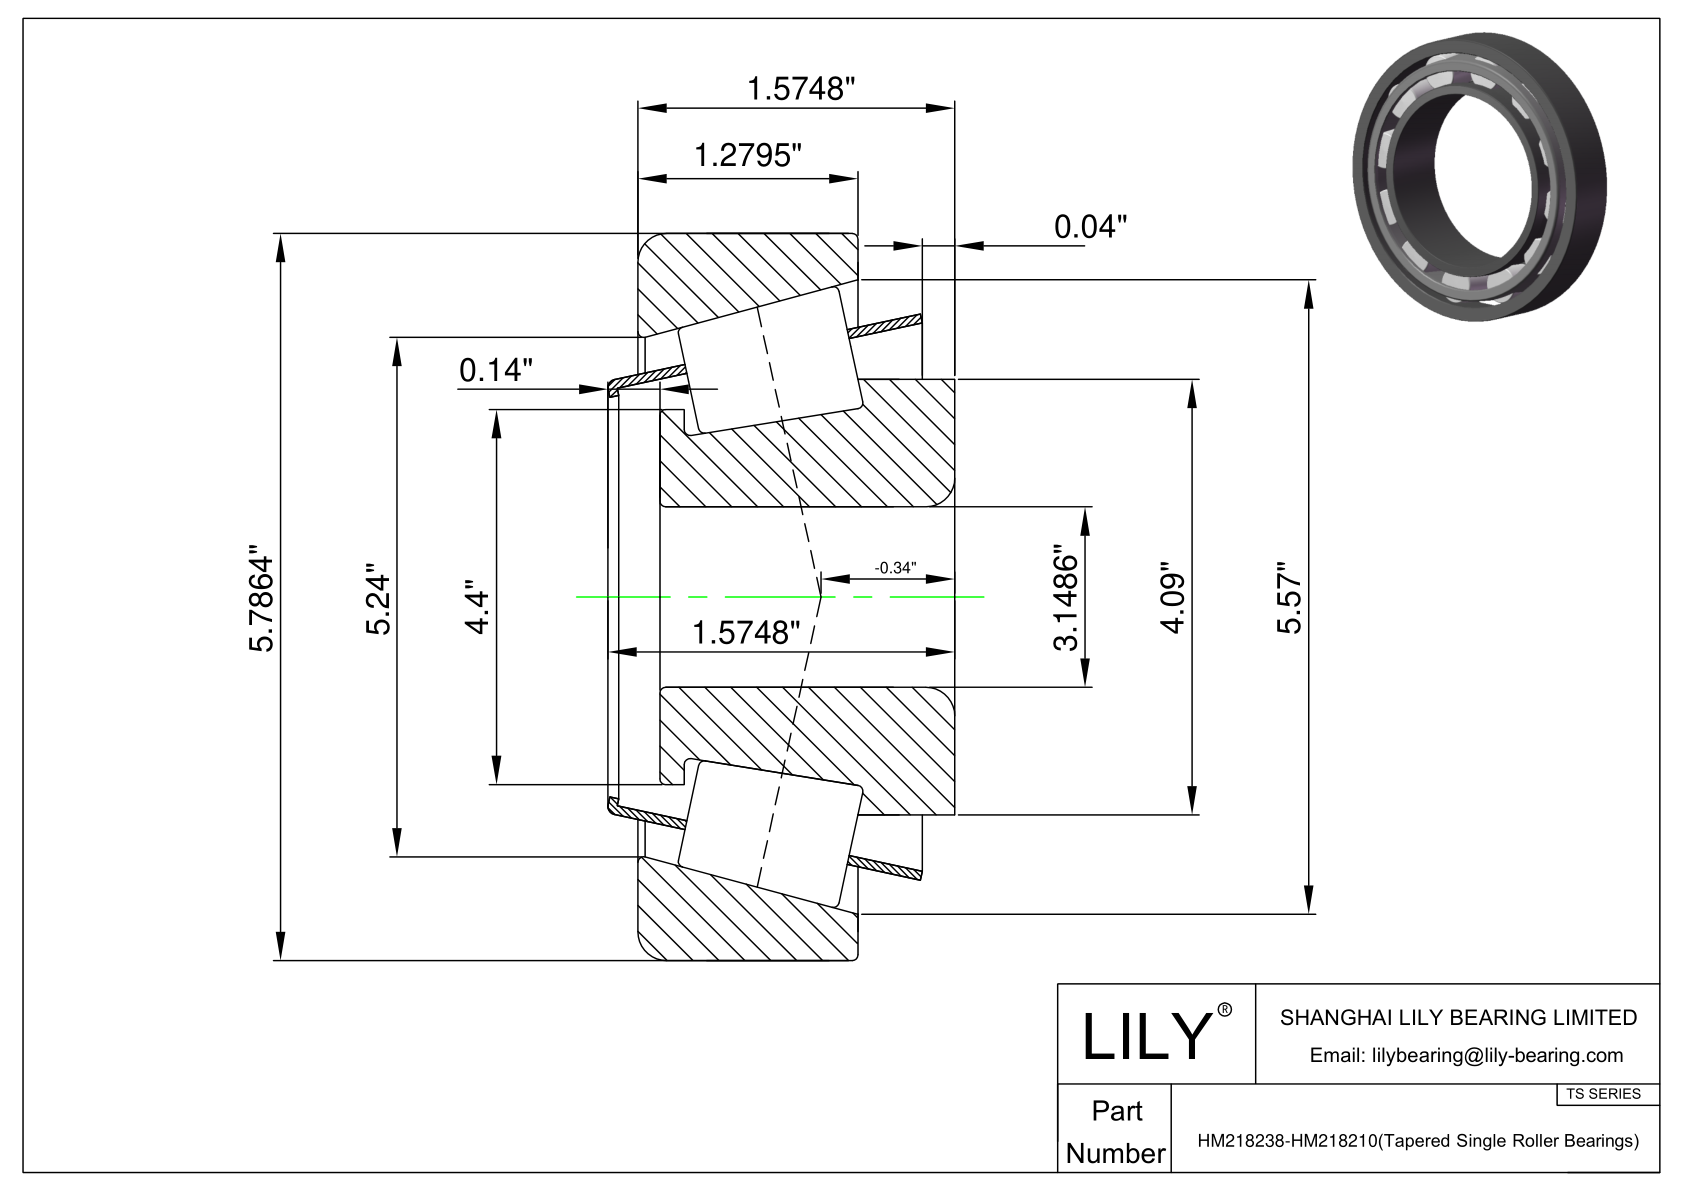 HM218238-HM218210 TS (Tapered Single Roller Bearings) (Imperial) cad drawing